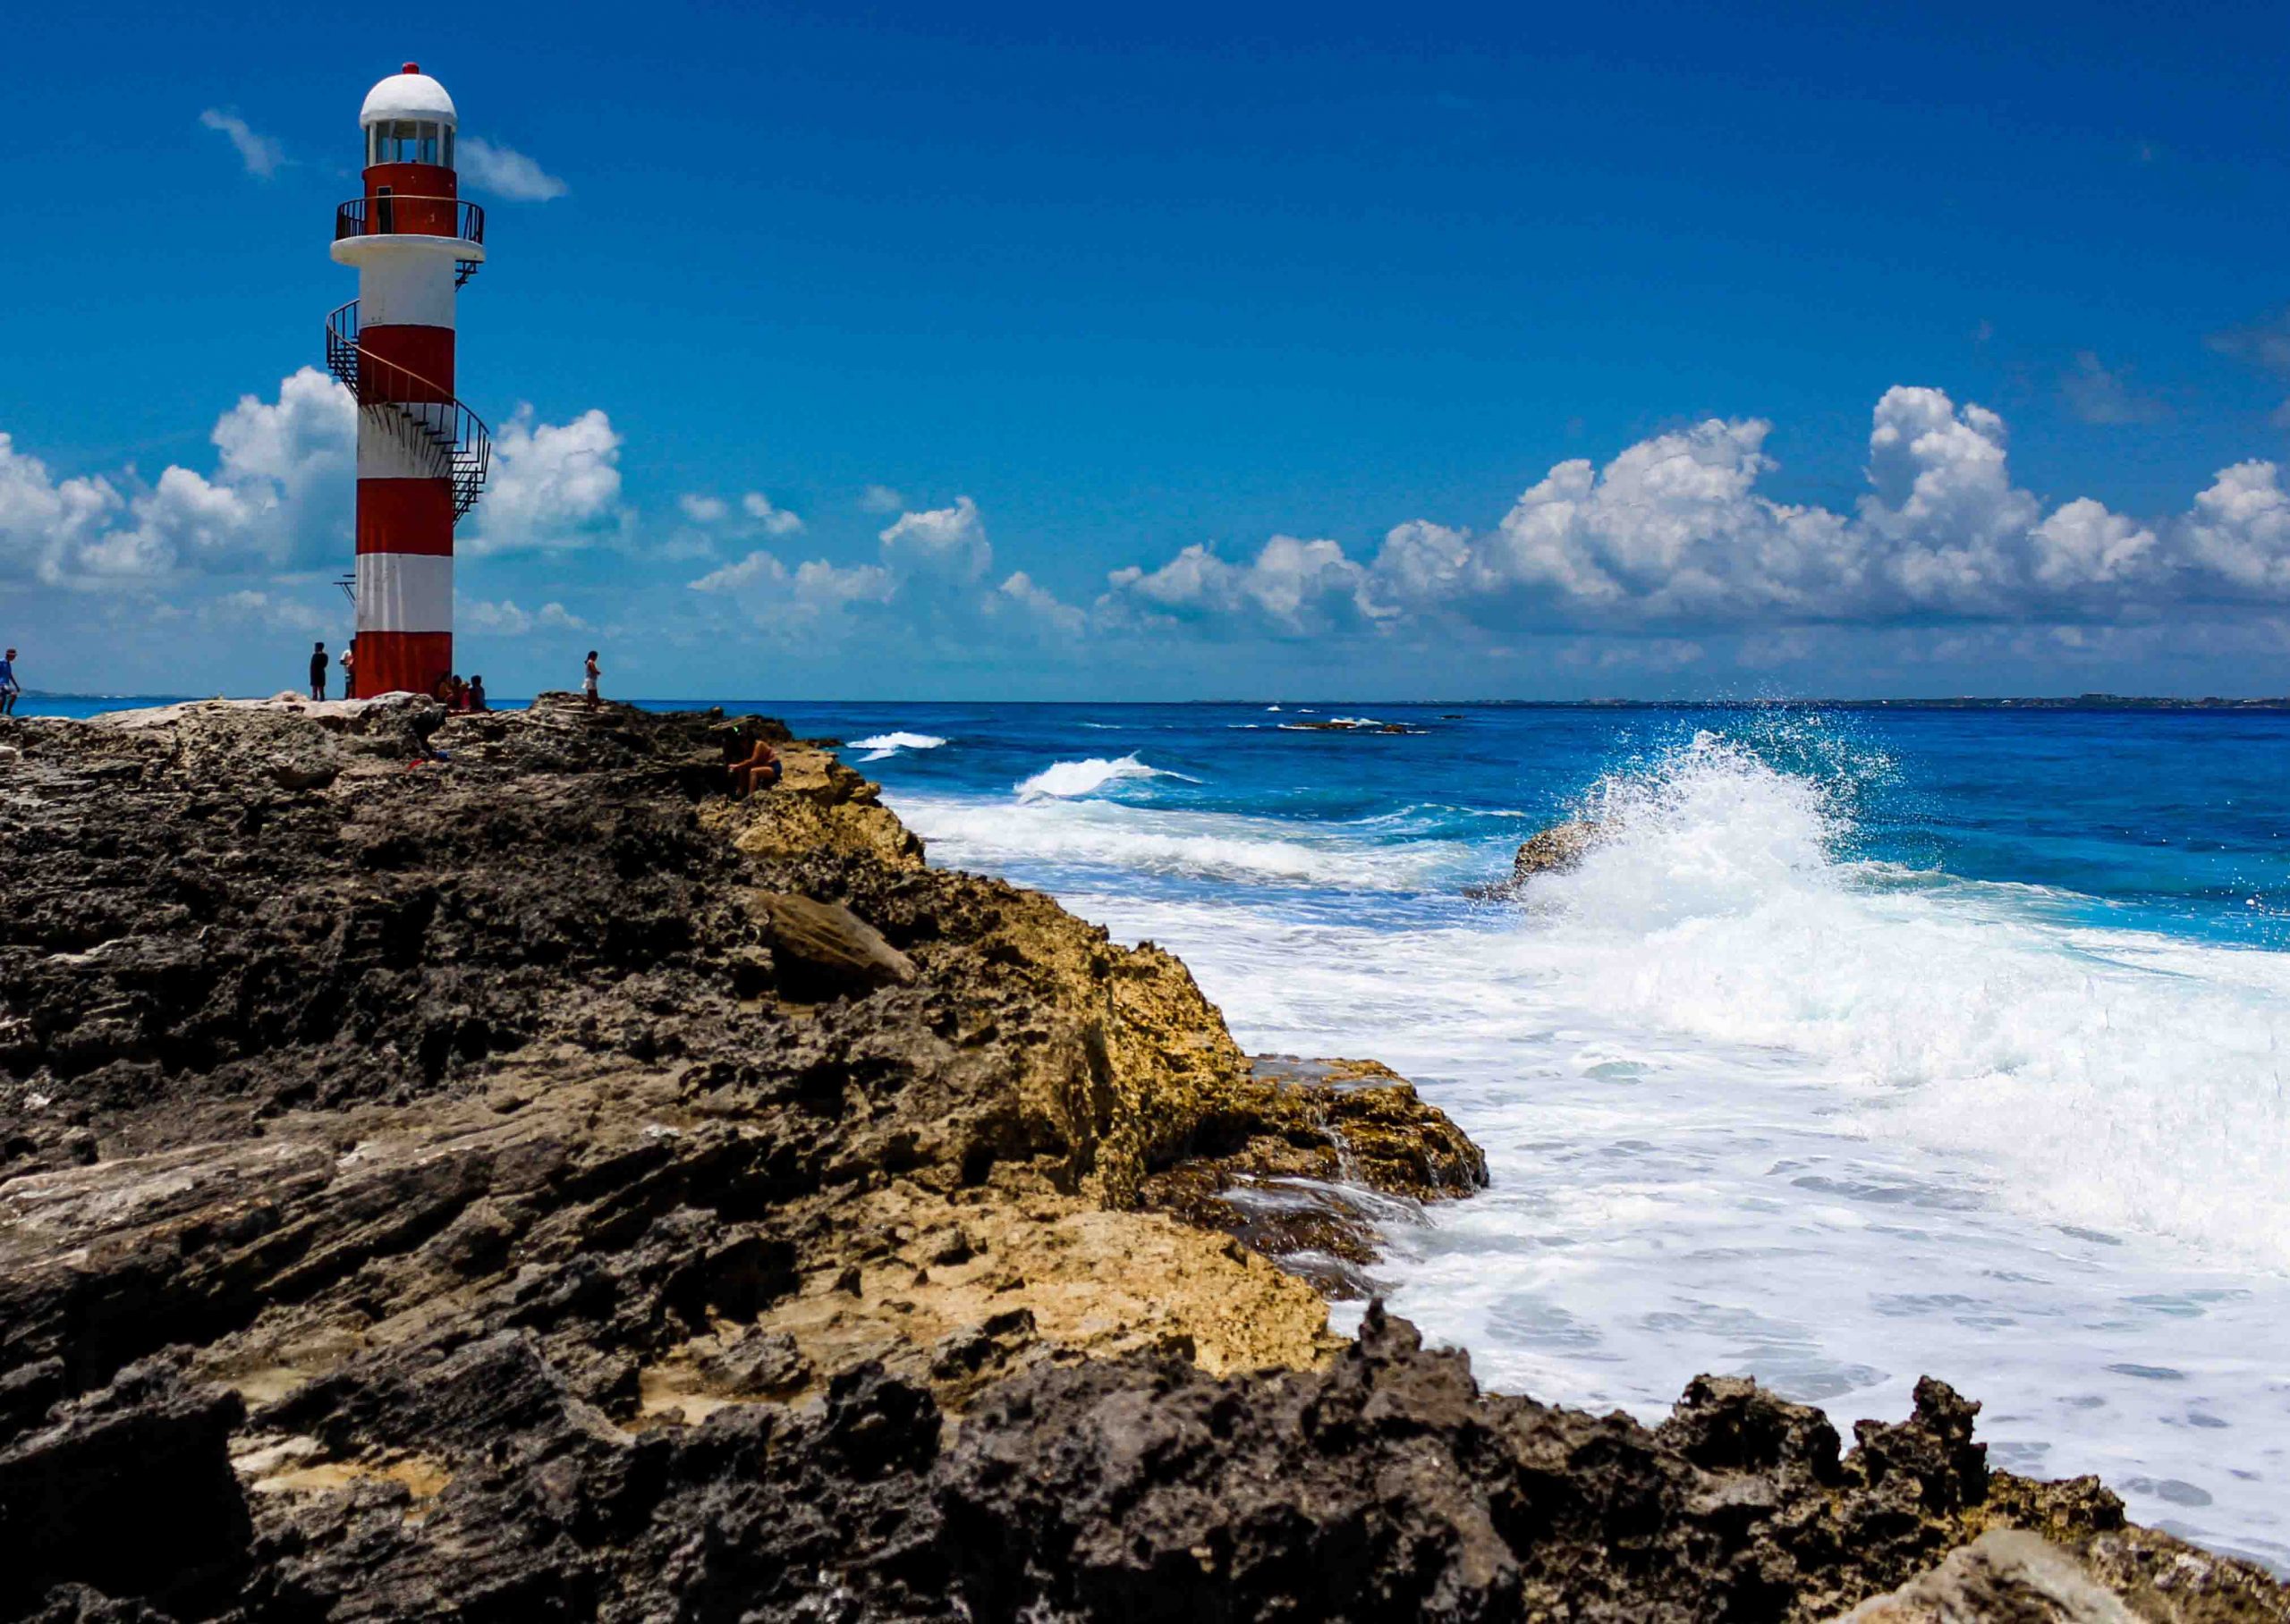 See the sunrise in the Punta Cancun's lighthouse 